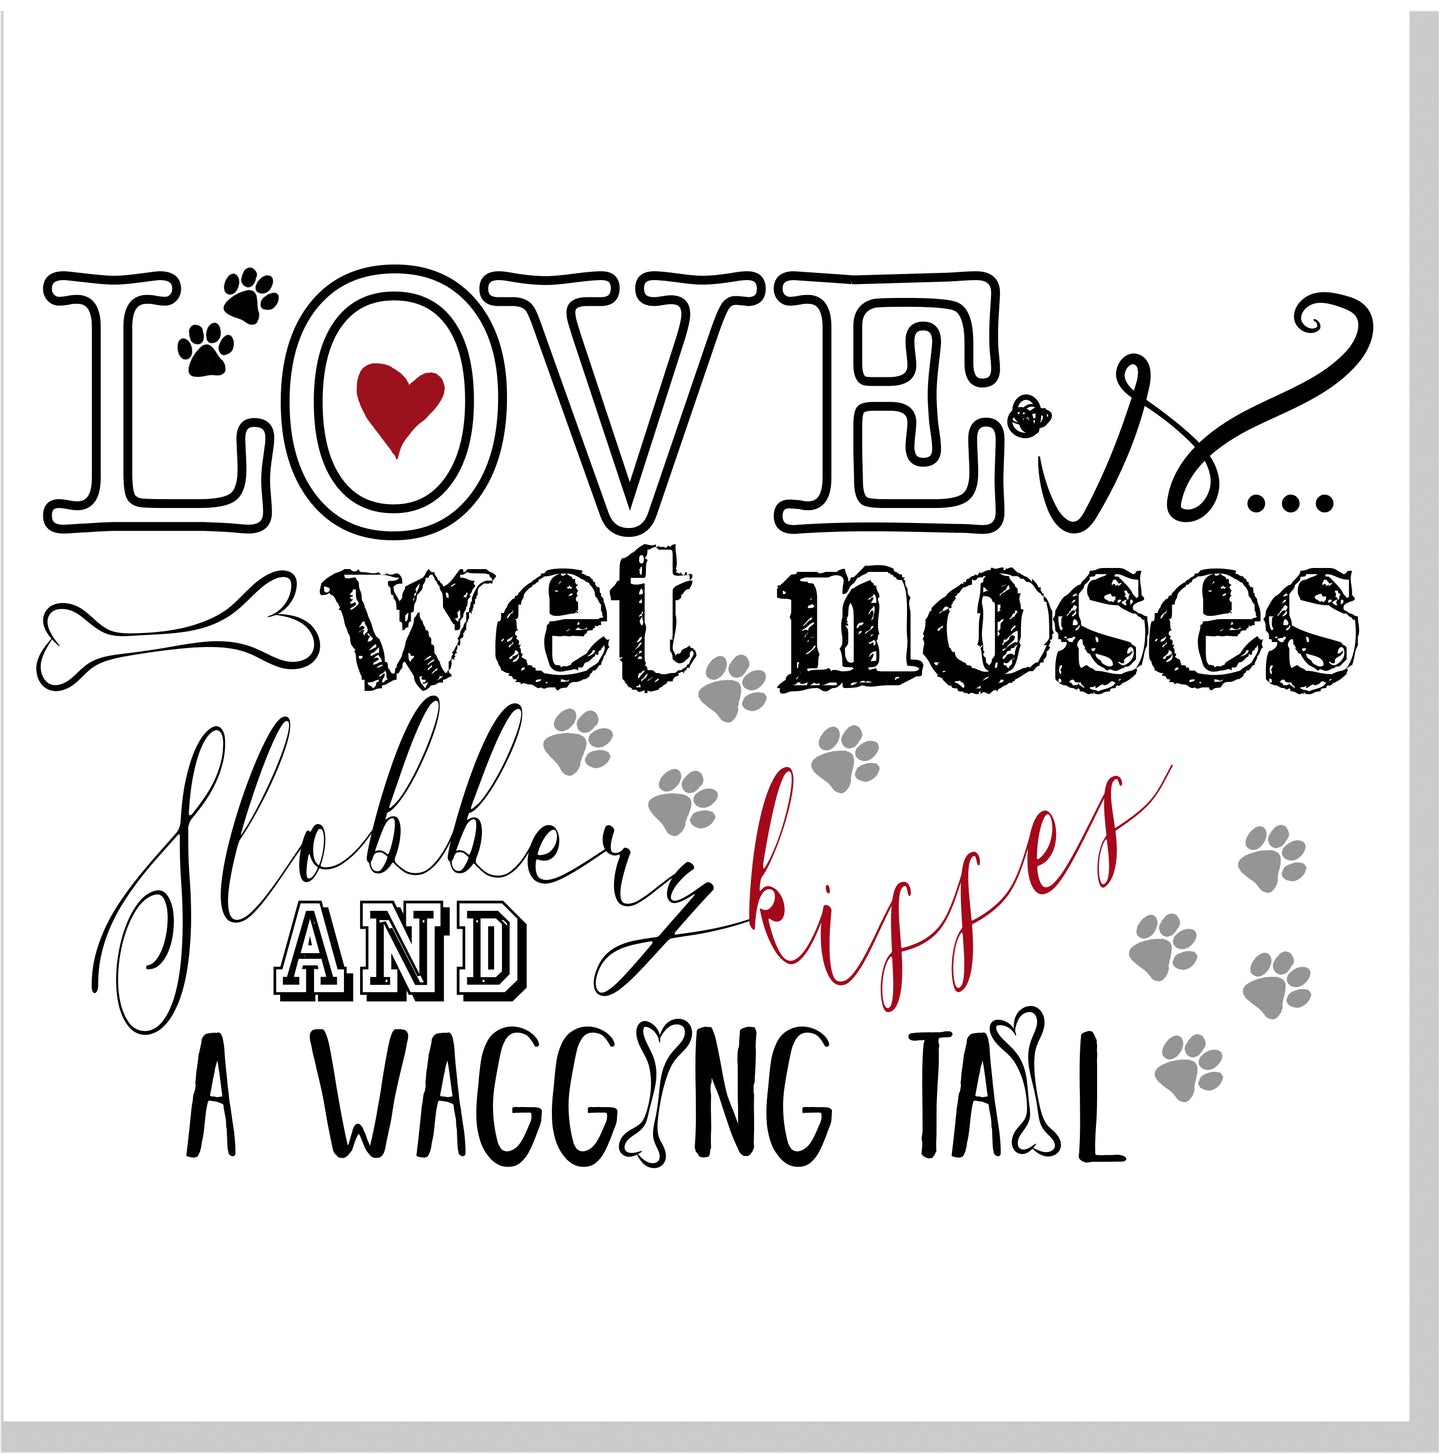 Love is wet nose square card